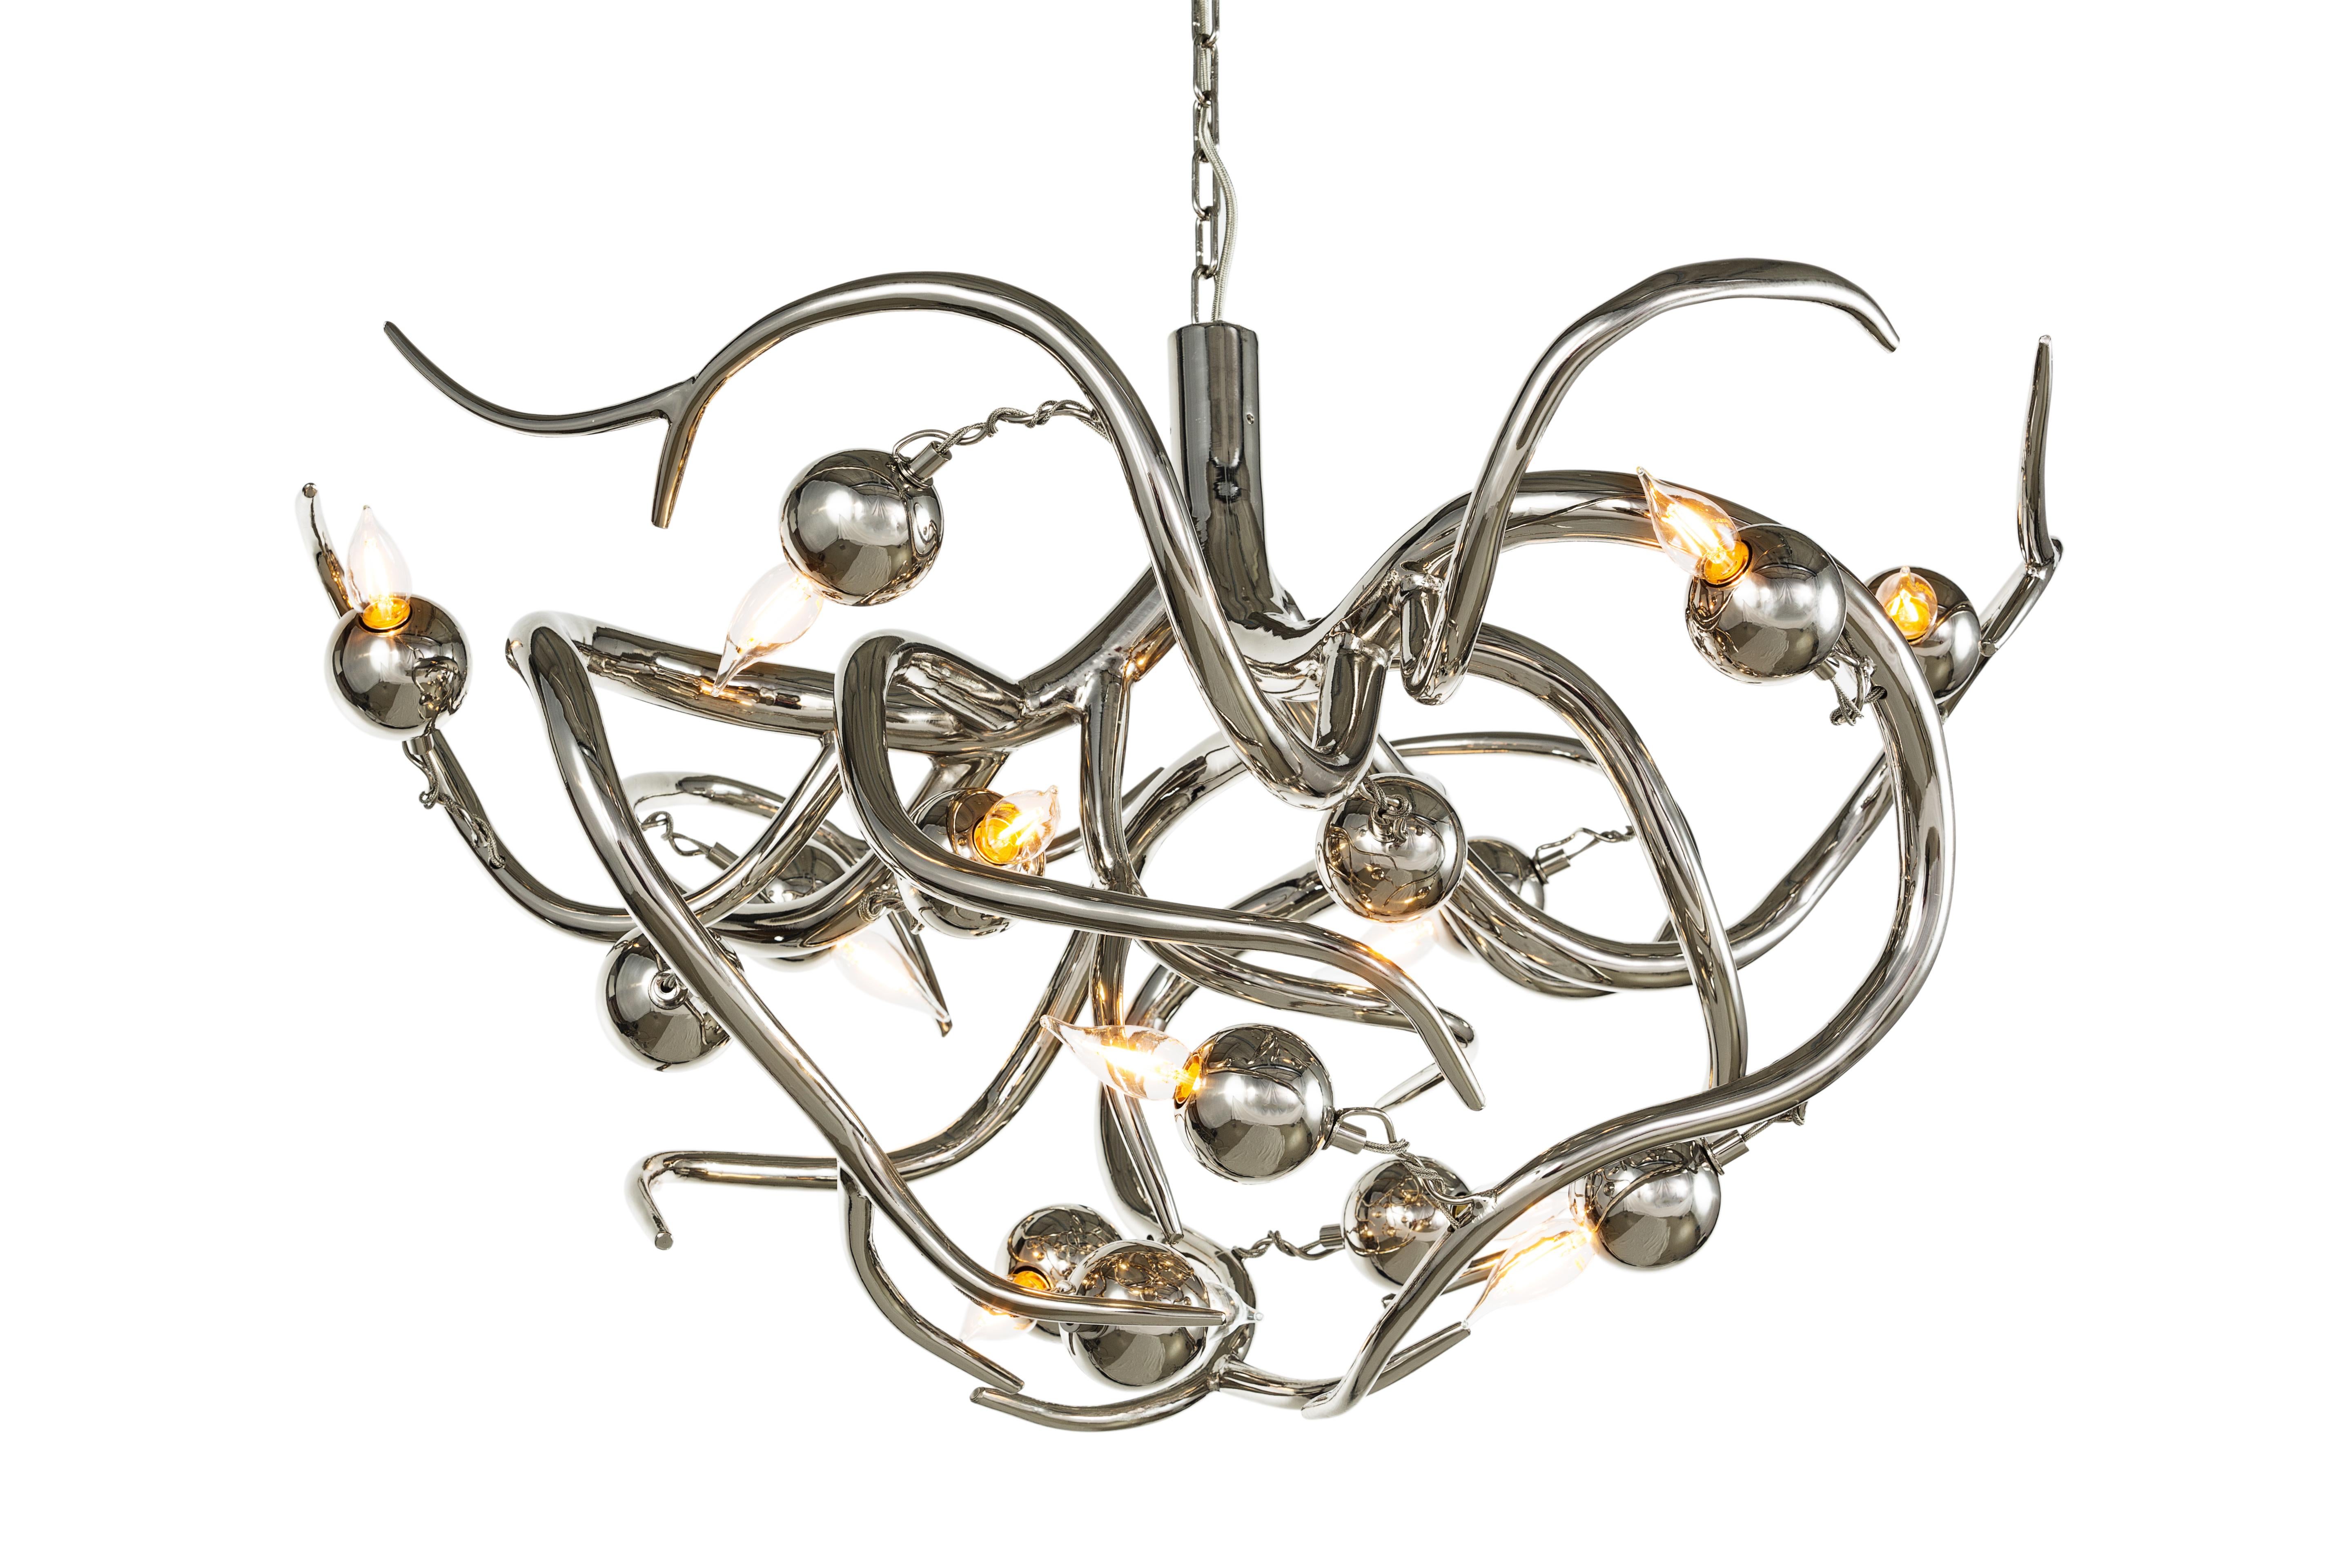 The Eve, a modern chandelier in a nickel finish, is designed by William Brand, founder of Brand van Egmond. Sculptural and full of character, the Eve chandelier is available in a round, oval or conical chandelier. There are several possible finishes